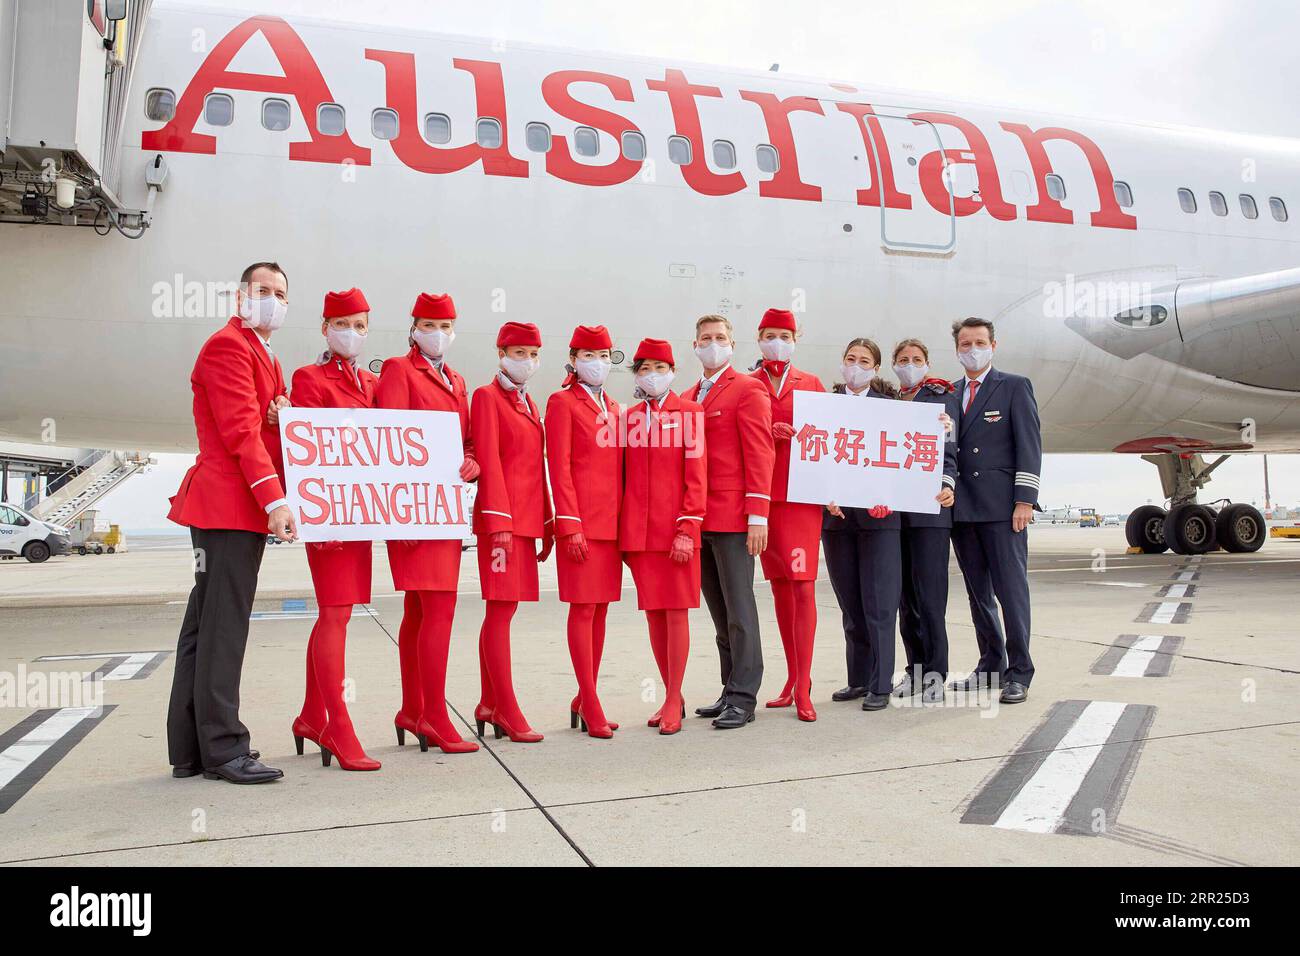 201002 -- VIENNA, Oct. 2, 2020 -- Crew of Austrian Airlines first resumed passenger flight to Shanghai pose for a group photo at the Vienna International Airport in Schwechat, Austria, on Oct. 2, 2020. Austrian Airlines resumed passenger flights to Shanghai on Friday, which were suspended due to the COVID-19 pandemic. Photo by /Xinhua AUSTRIA-SCHWECHAT-AUSTRIAN AIRLINES-PASSENGER FLIGHTS TO SHANGHAI-RESUMPTION GeorgesxSchneider PUBLICATIONxNOTxINxCHN Stock Photo